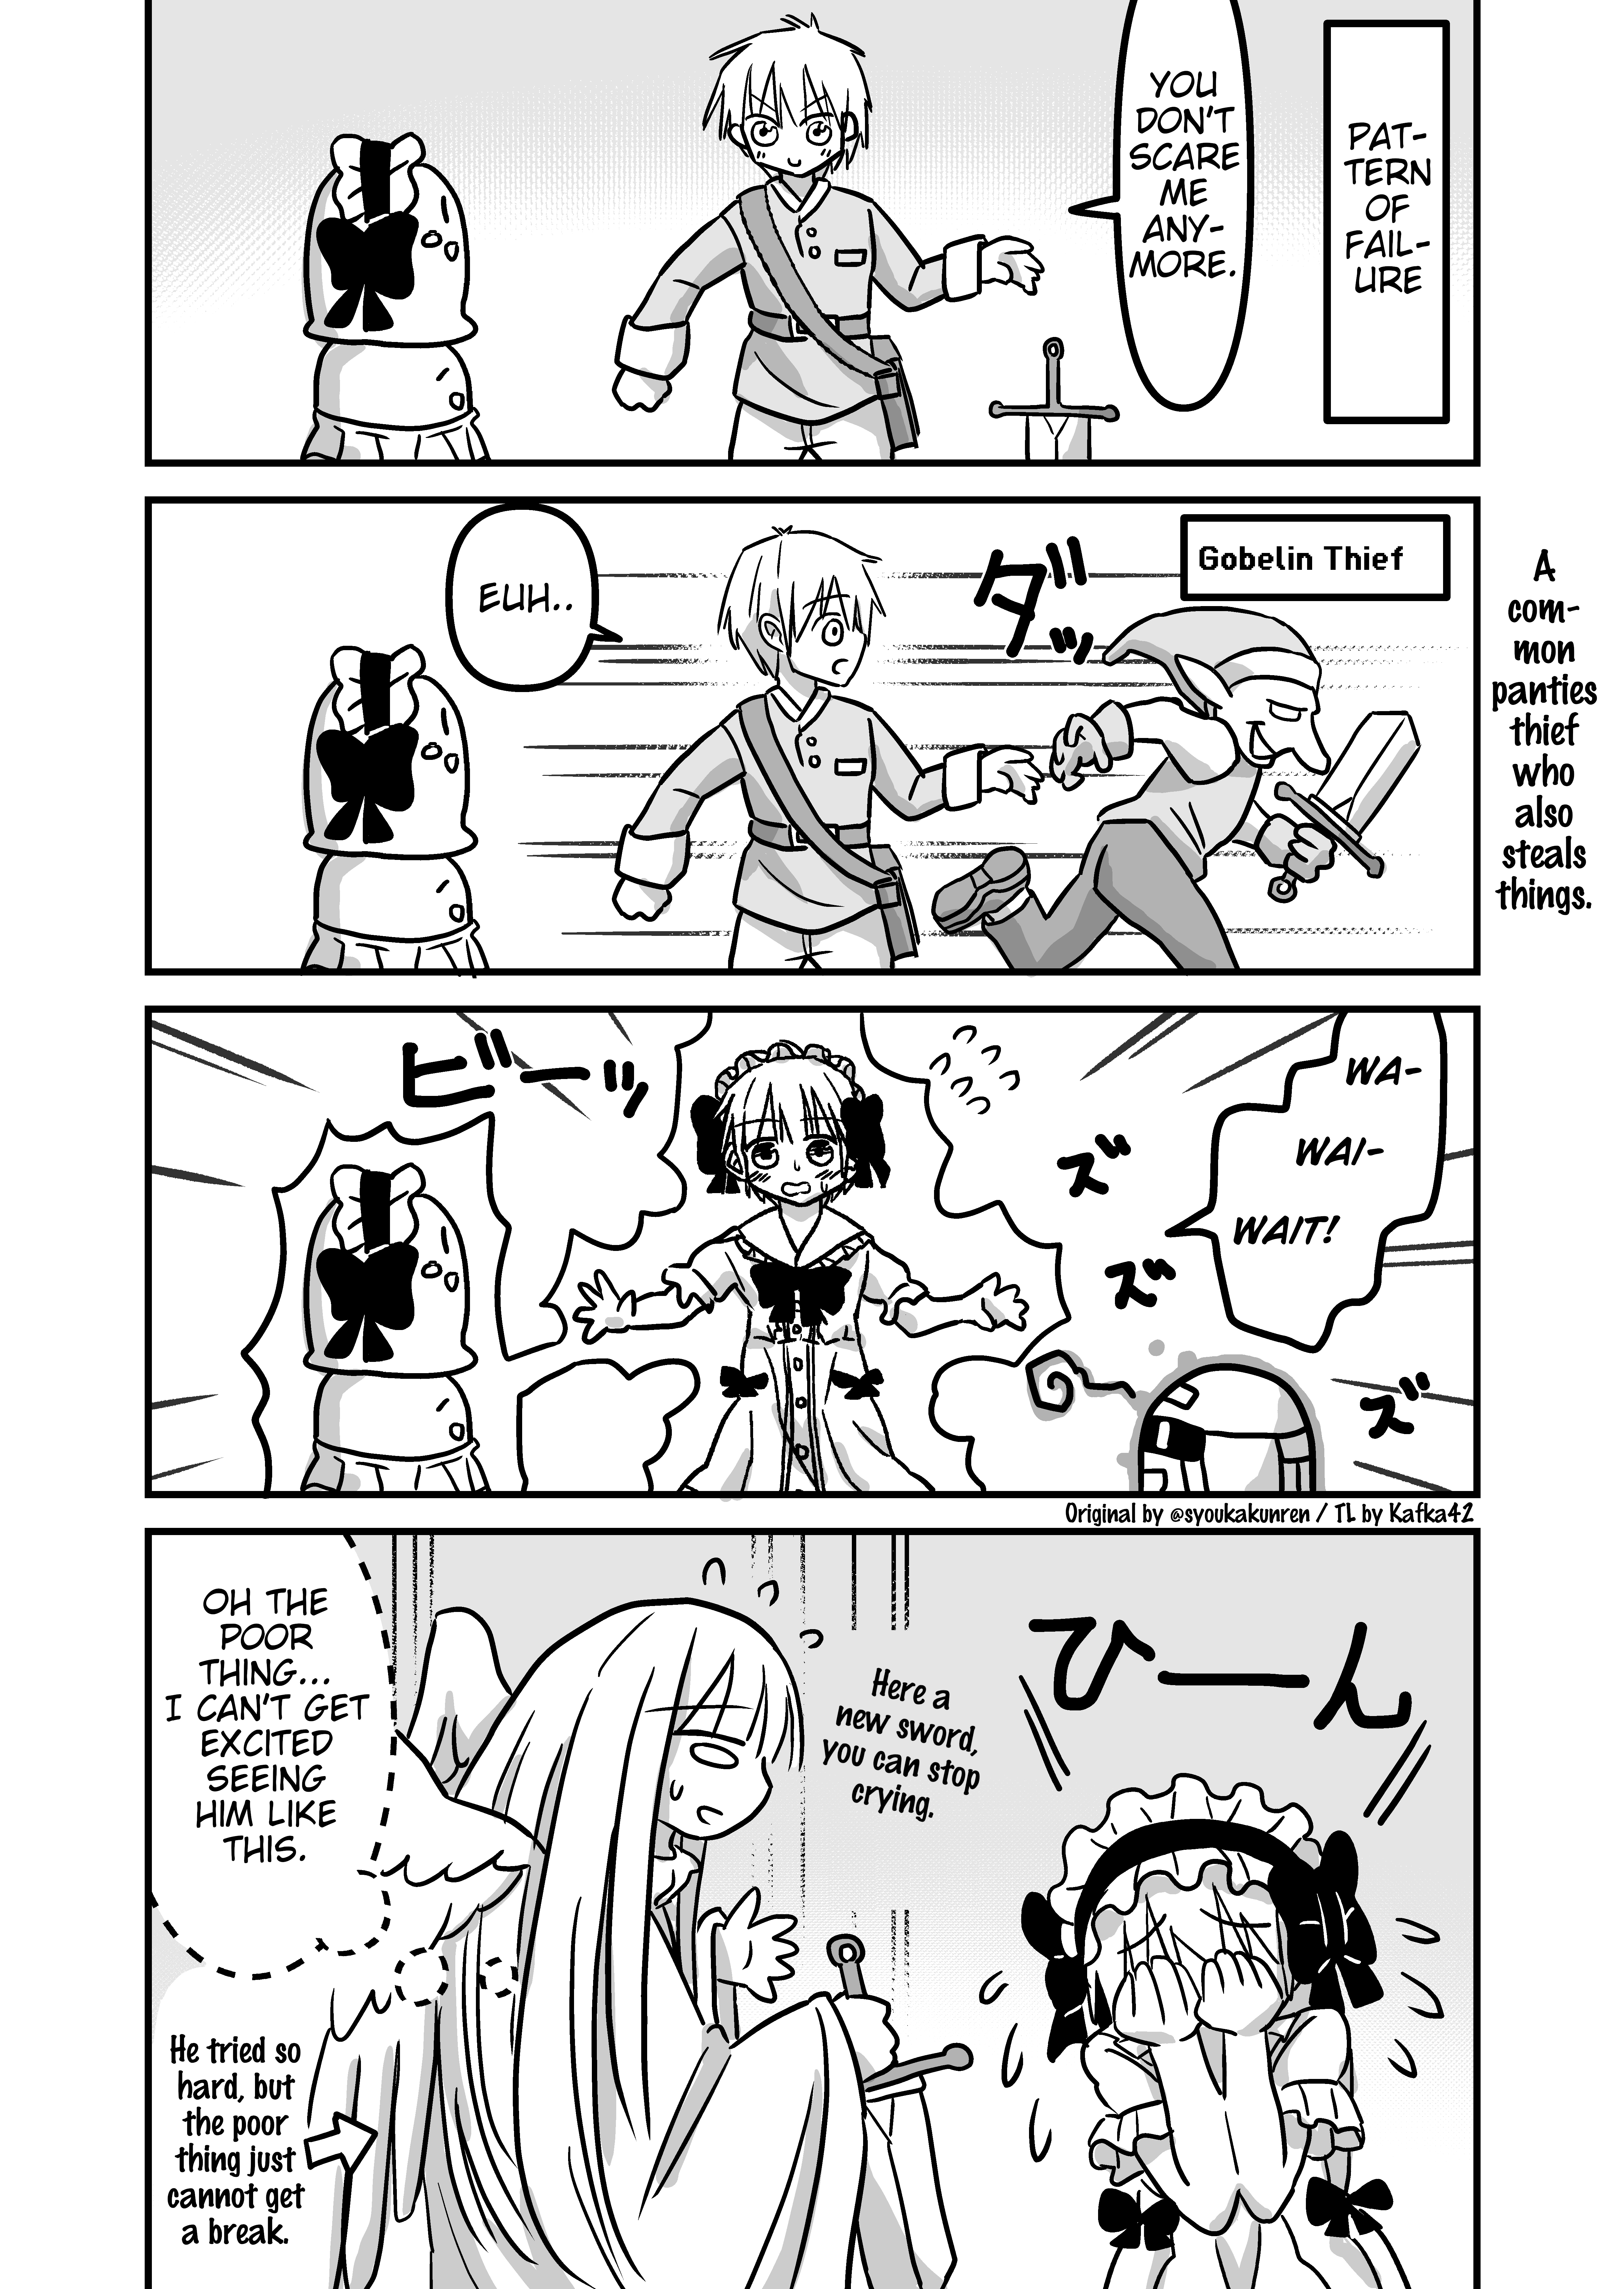 Crossdressing Quest - Page 1